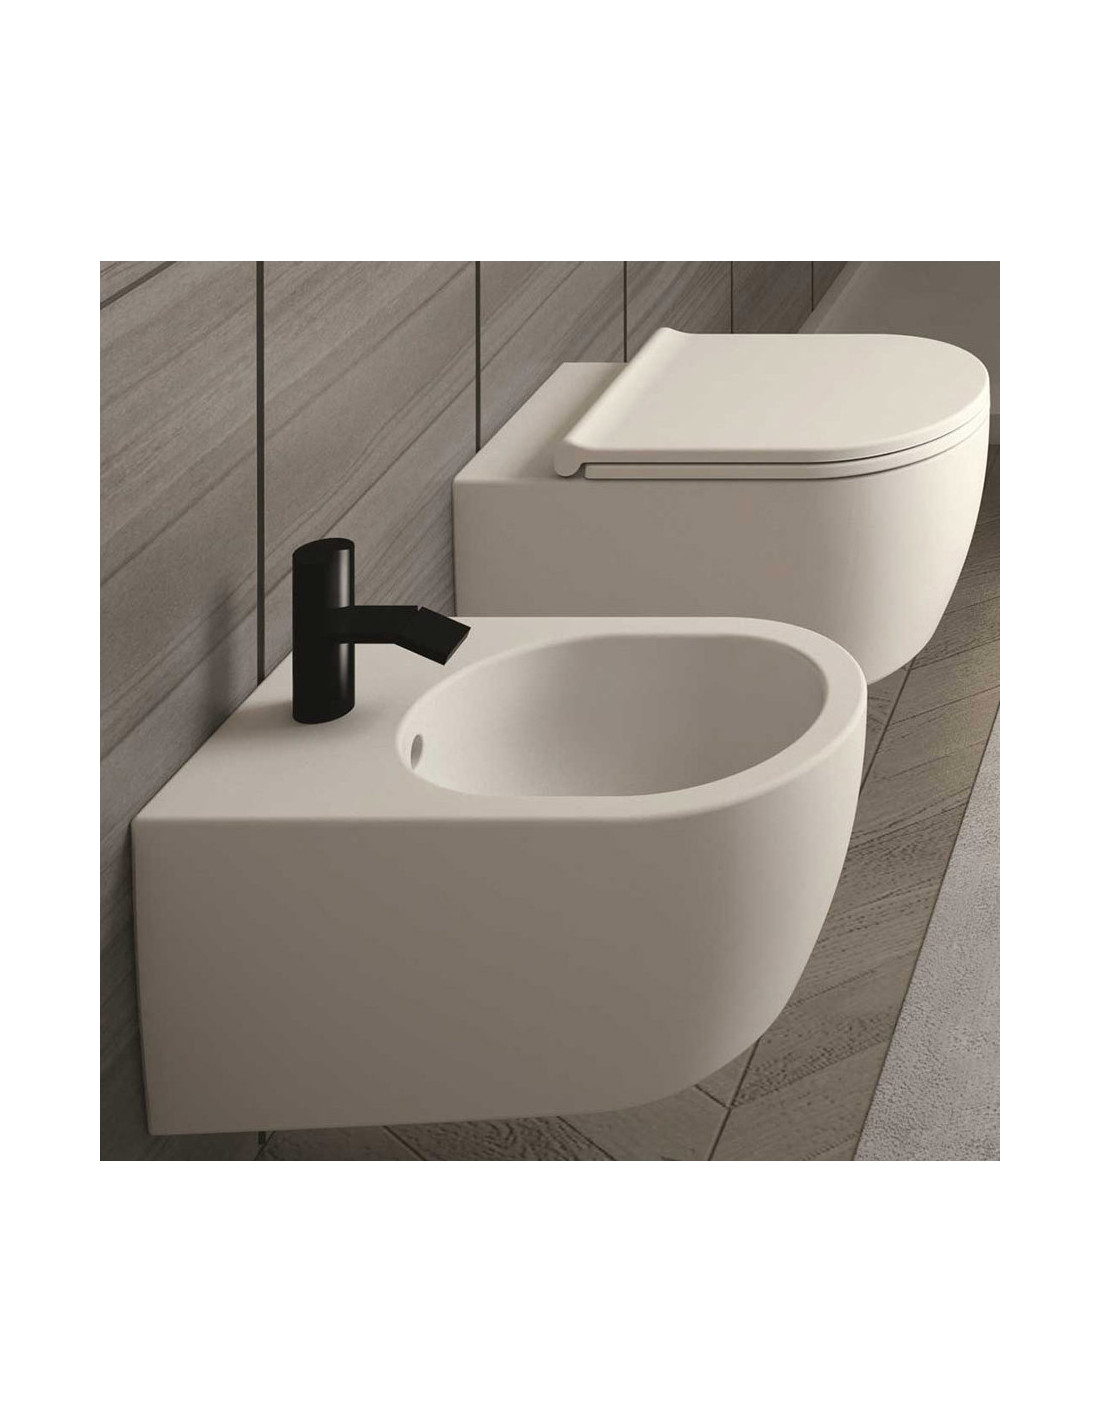 SMILE MINI  Wall-hung toilet Wall-hung ceramic toilet By Ceramica Cielo